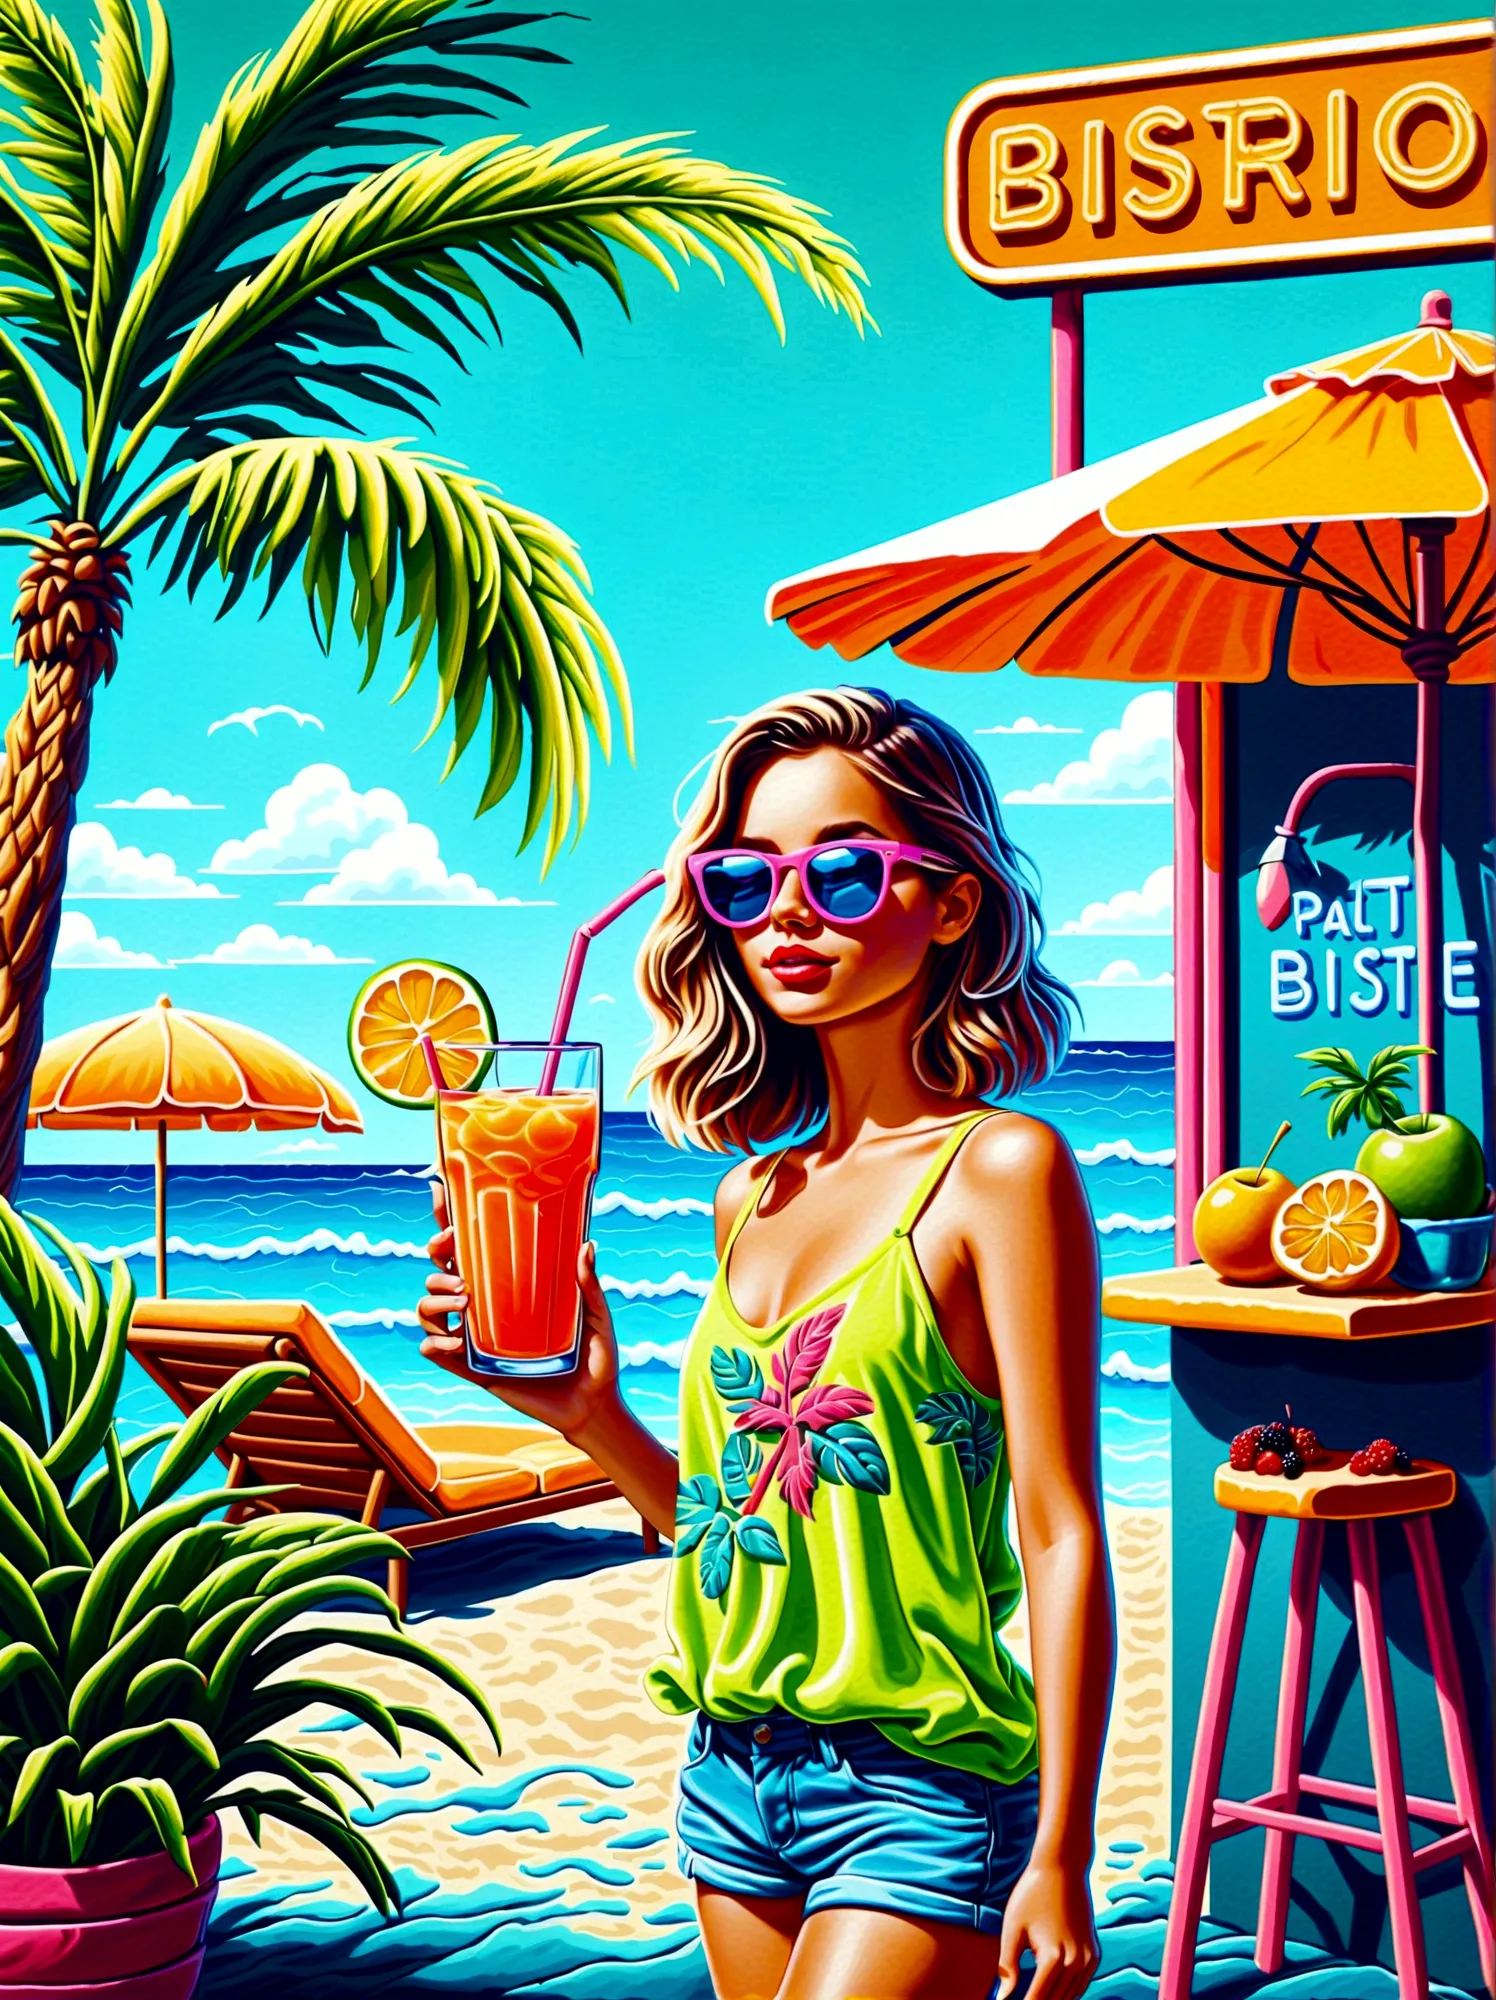 Neon，Shop sign，Tropical scene，Palm tree，Bistro，Fruit drinks，Sea，Cool little girl wearing sunglasses，发光的NeonShop sign，Ultra high ...